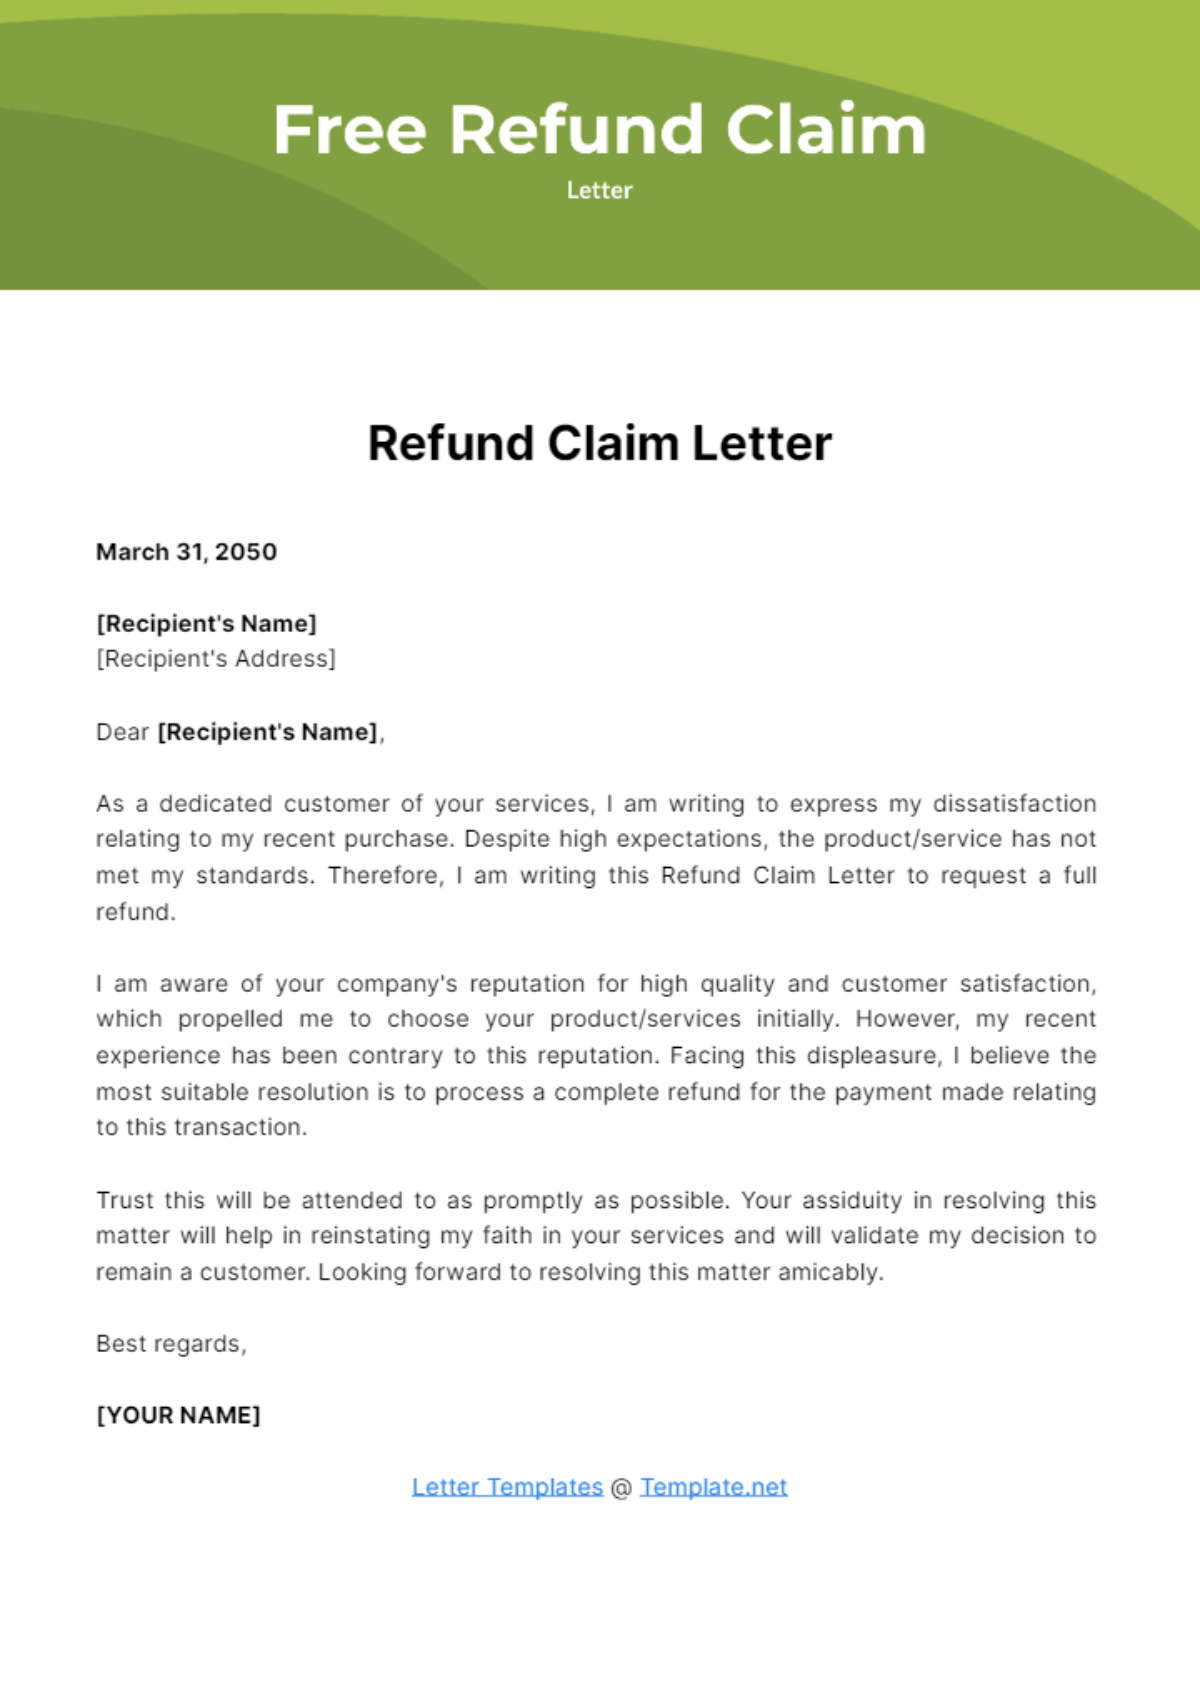 Free Refund Claim Letter Template